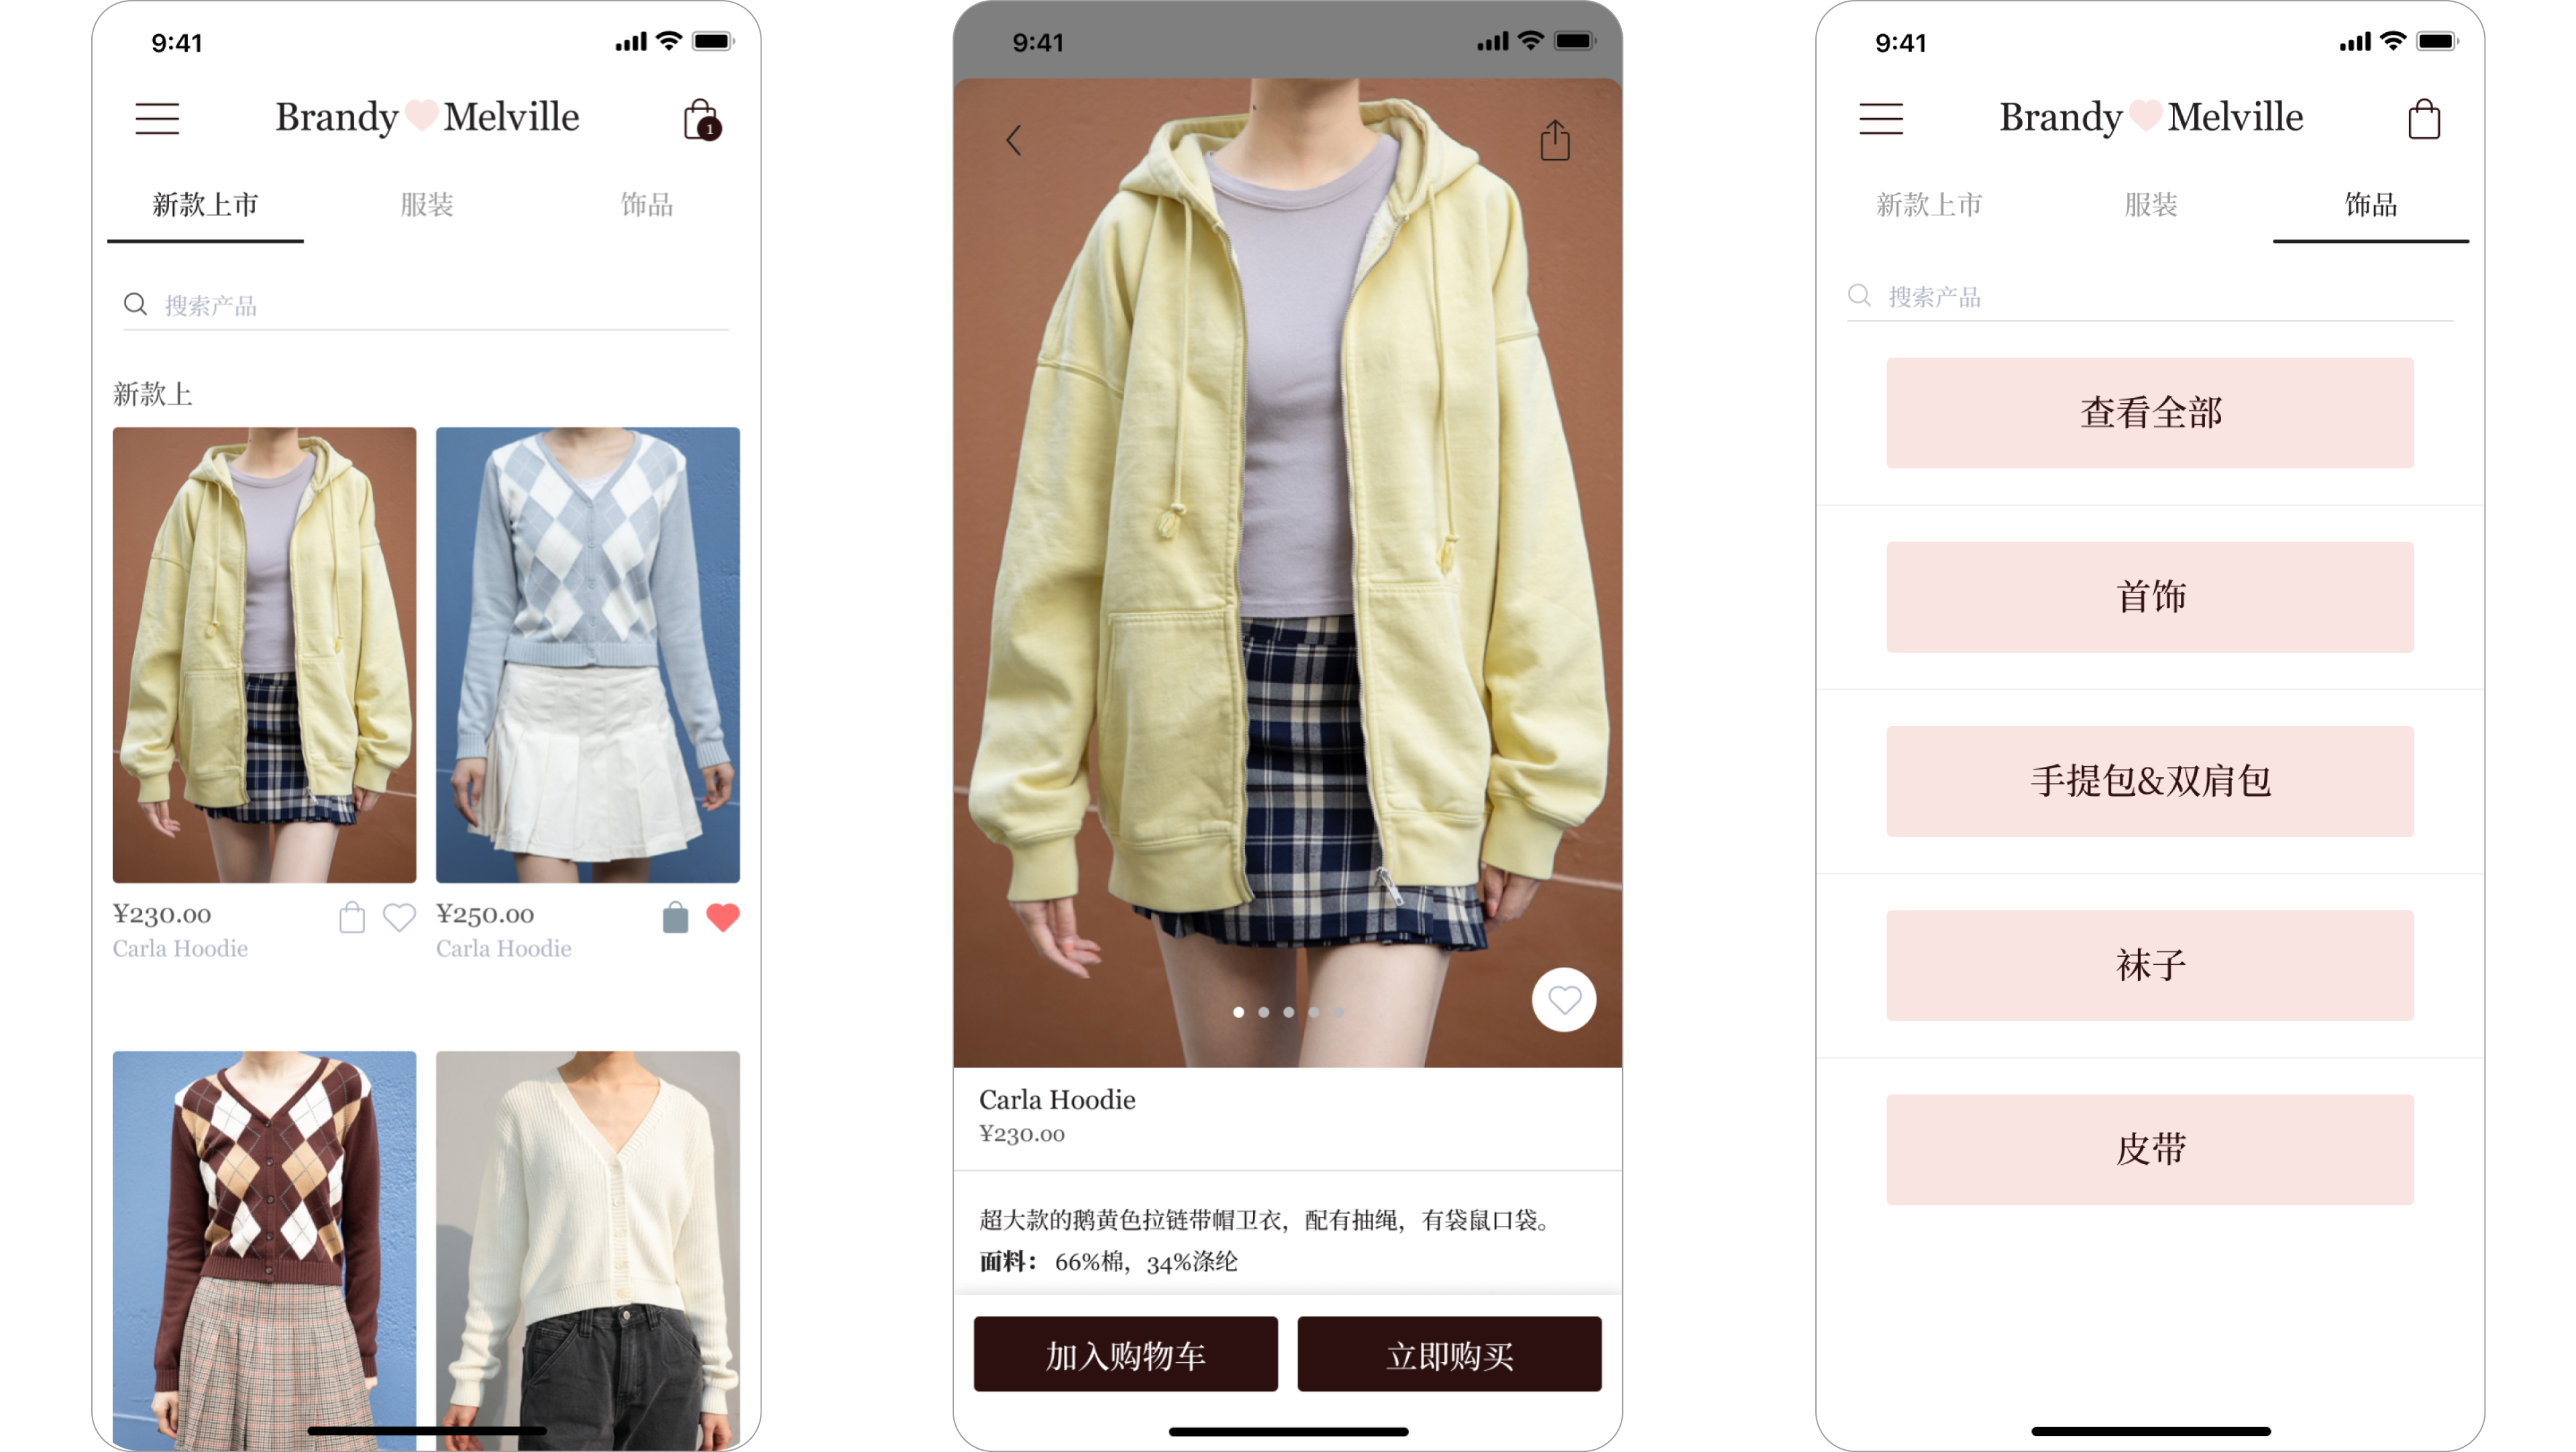 Brandy Melville homepage displayed the latest product listing